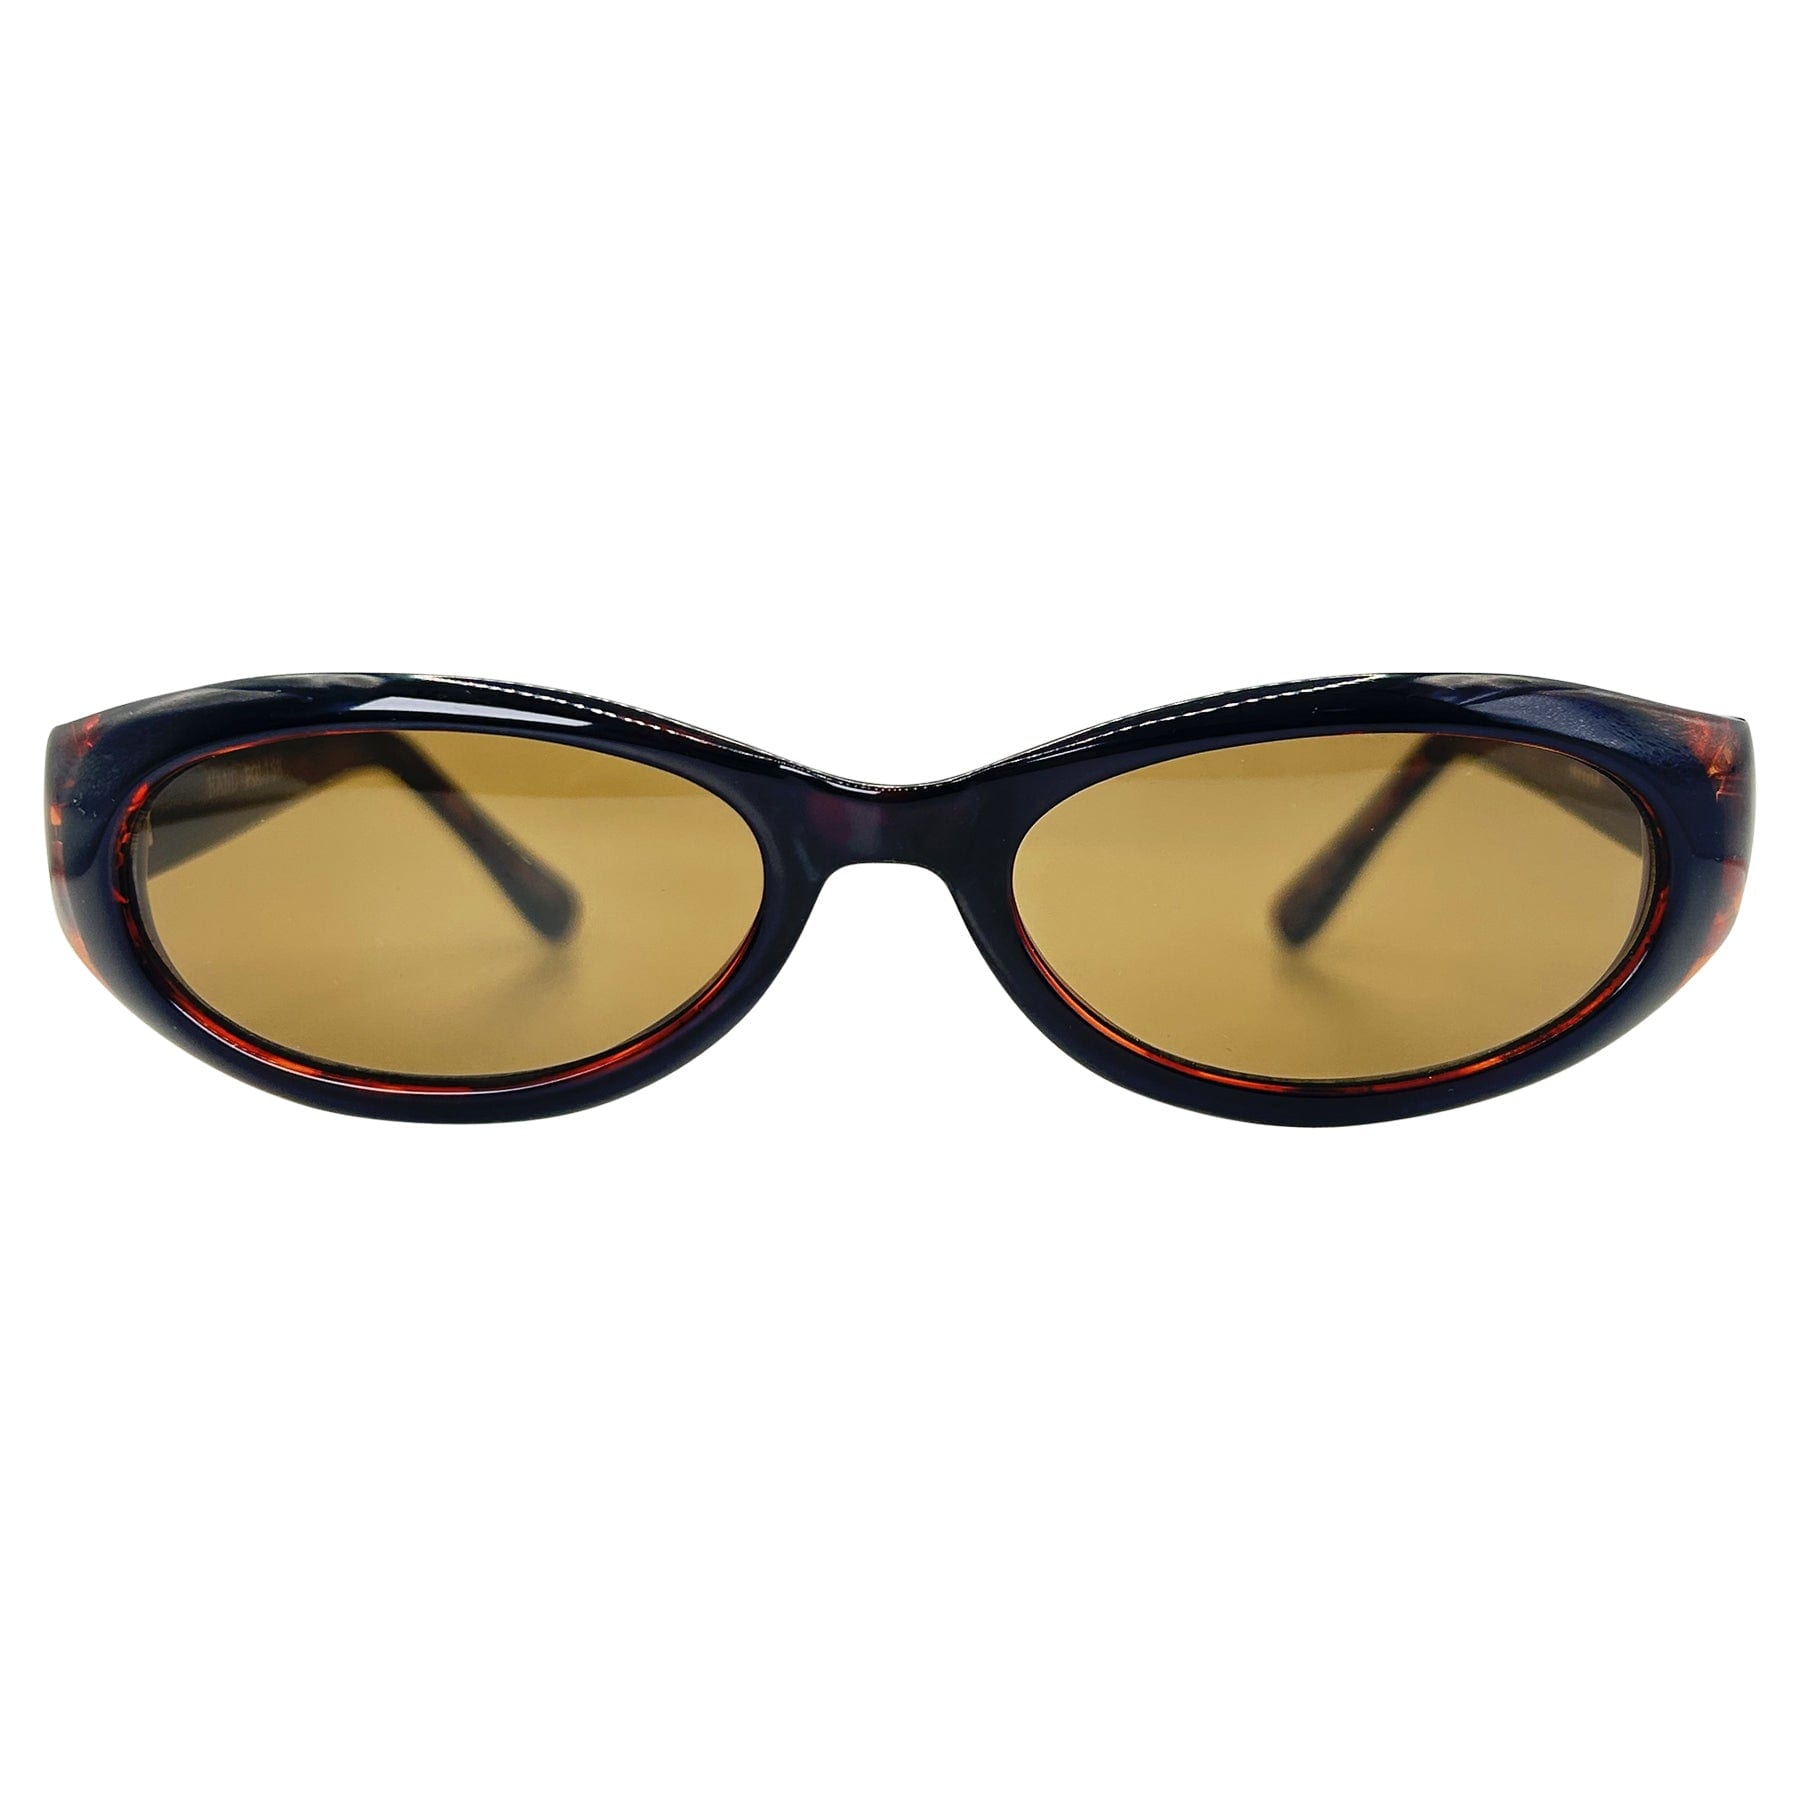 tortoise shell sunglasses with a brown lens